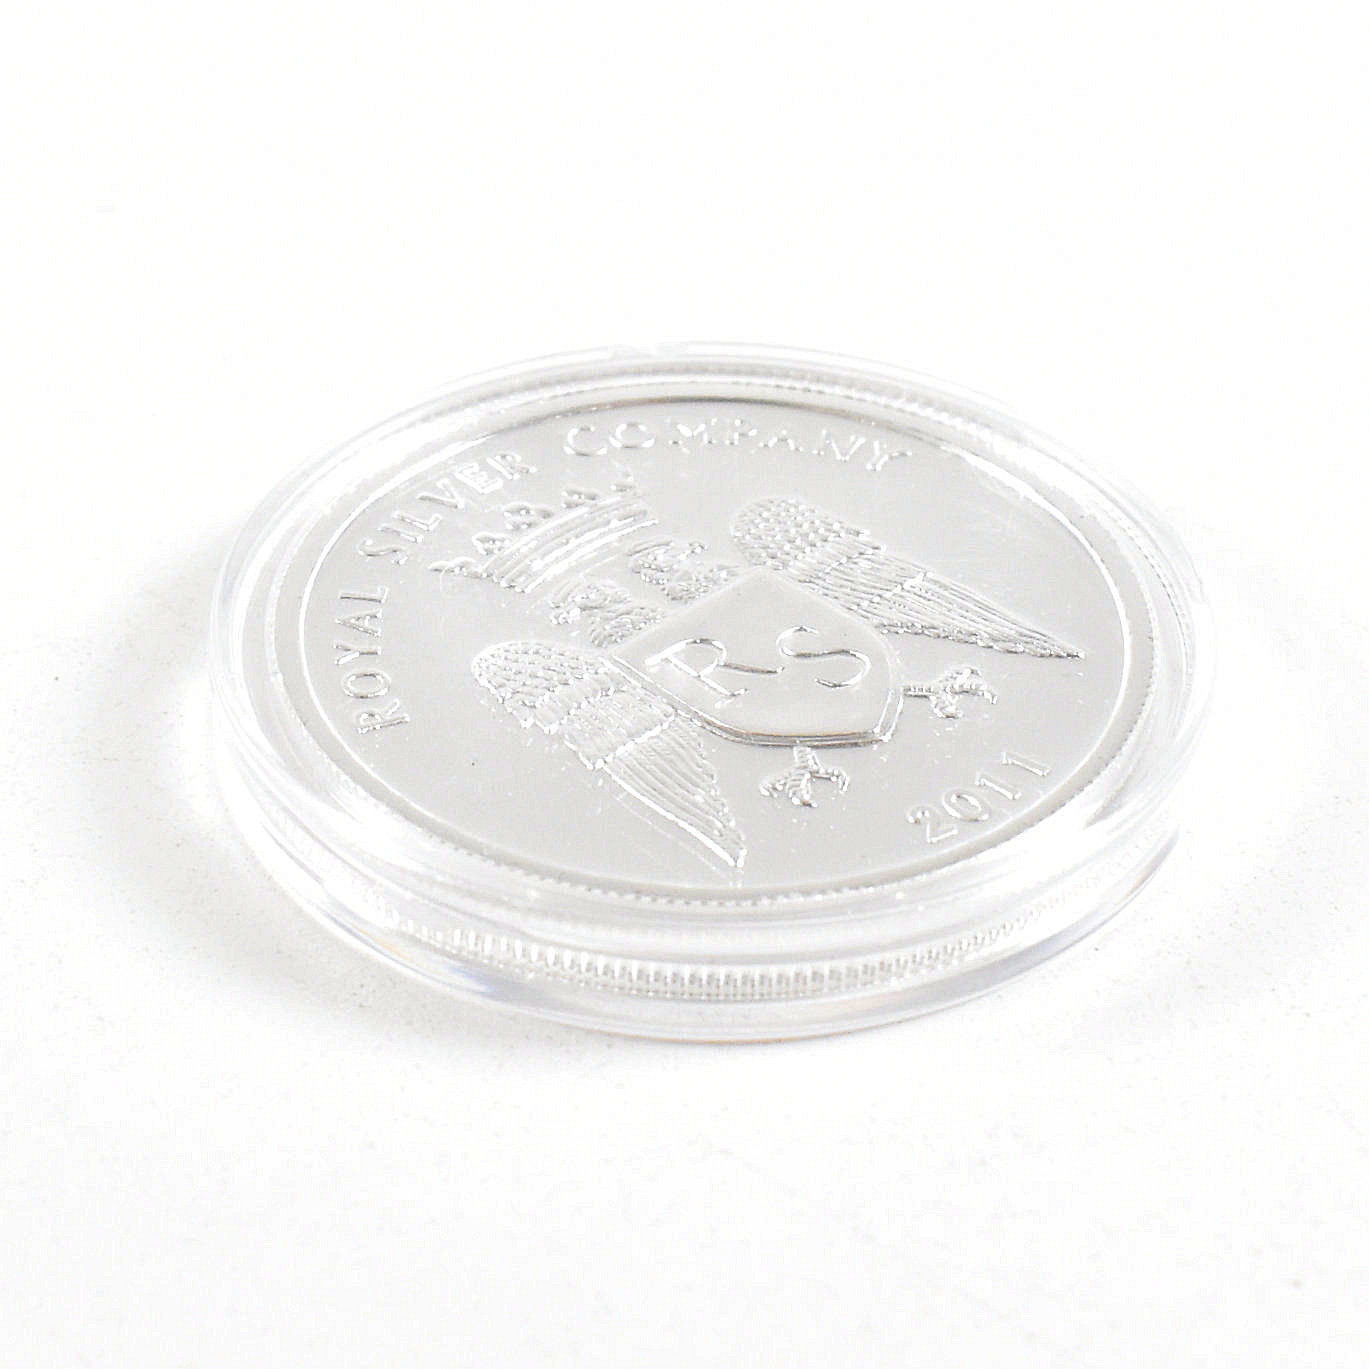 ONE 0Z 2011 ROYAL SILVER COMPANY COIN FINE SILVER - Image 4 of 4